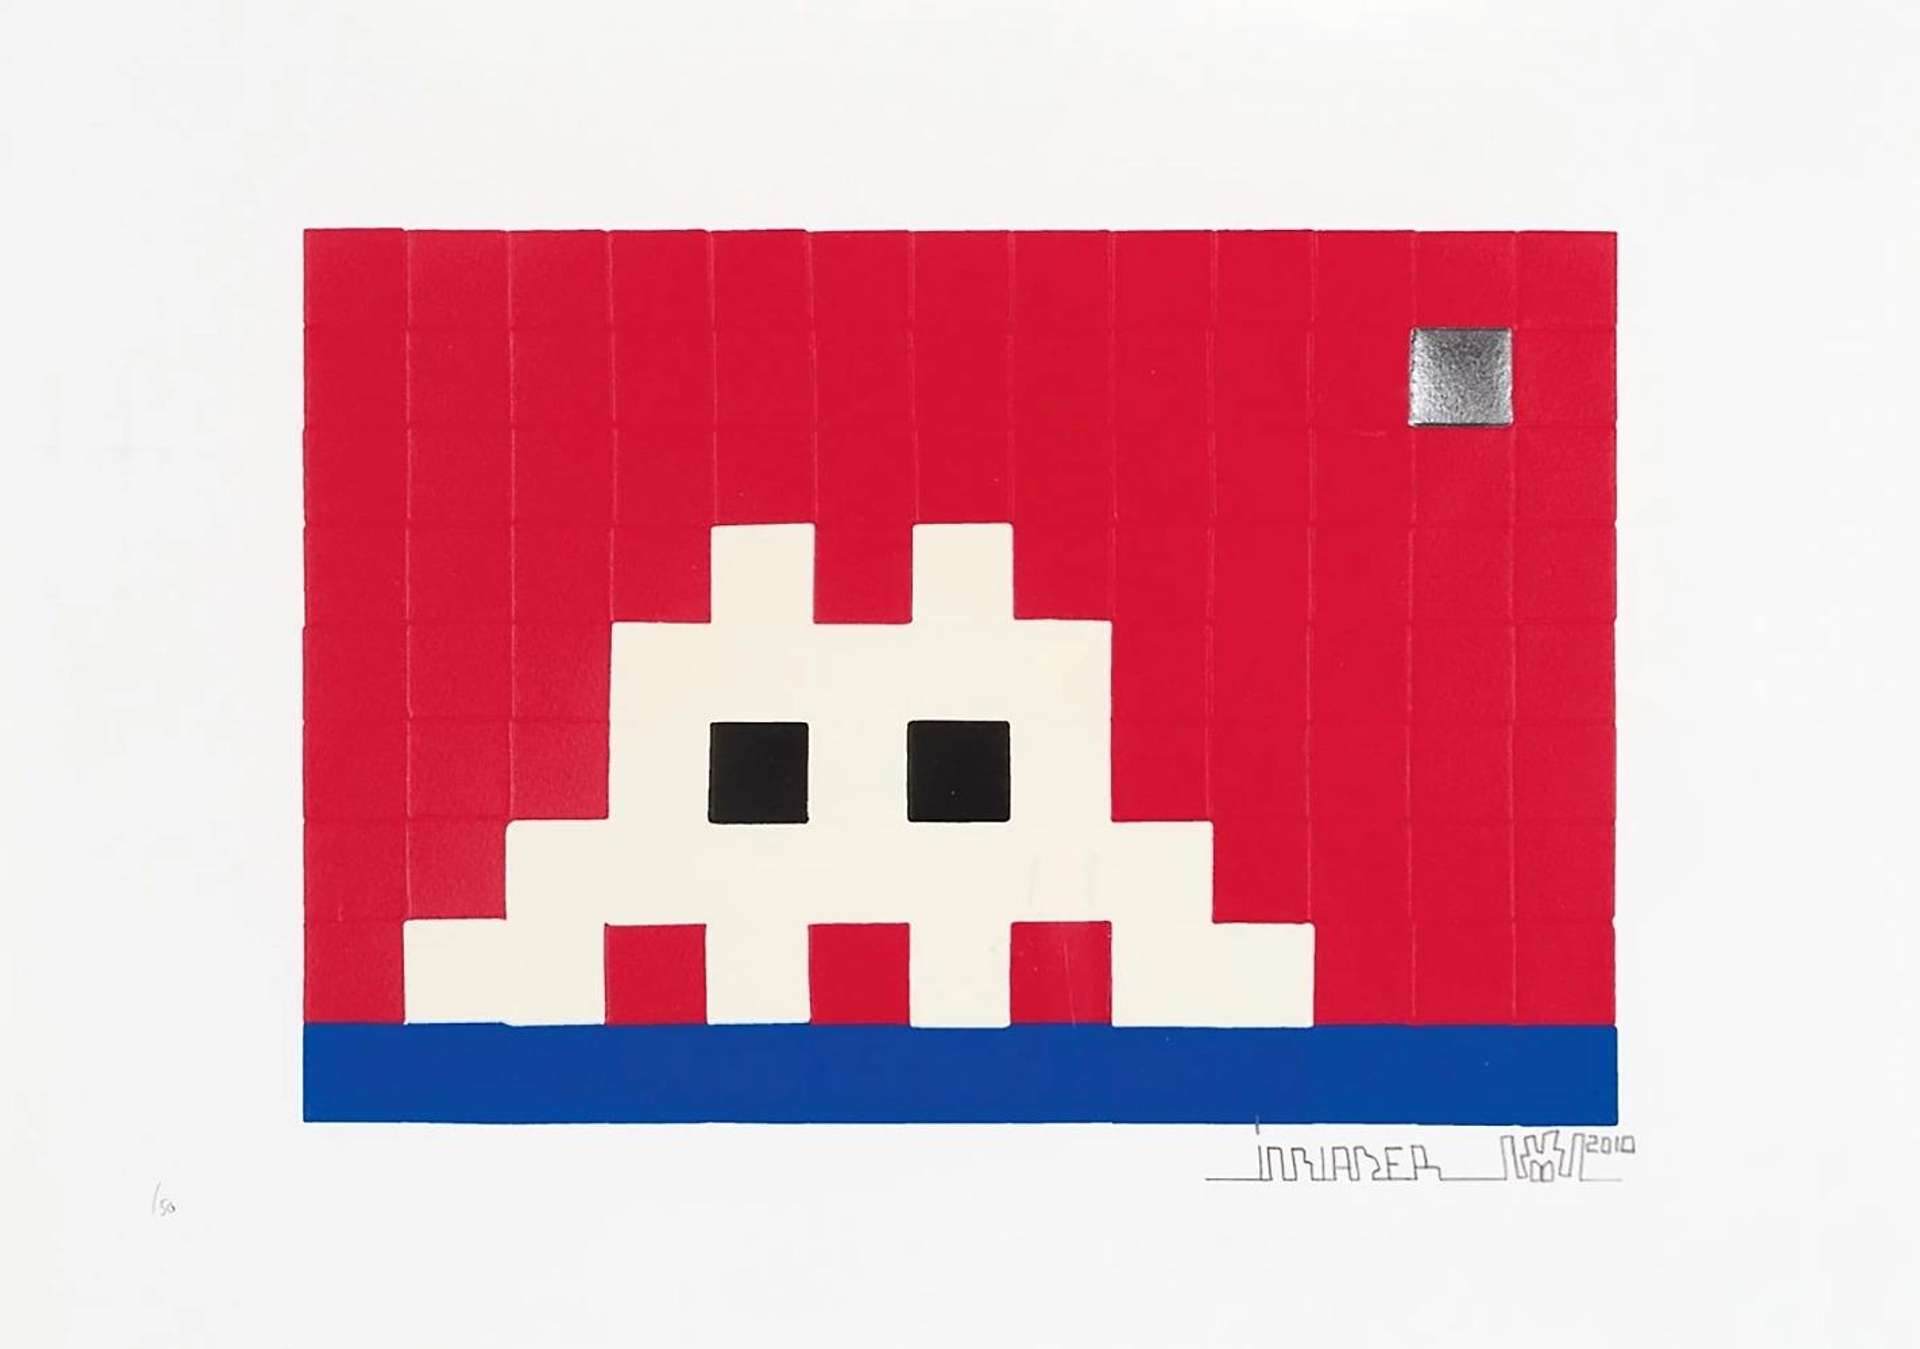 A Buyer's Guide to Invader Prints